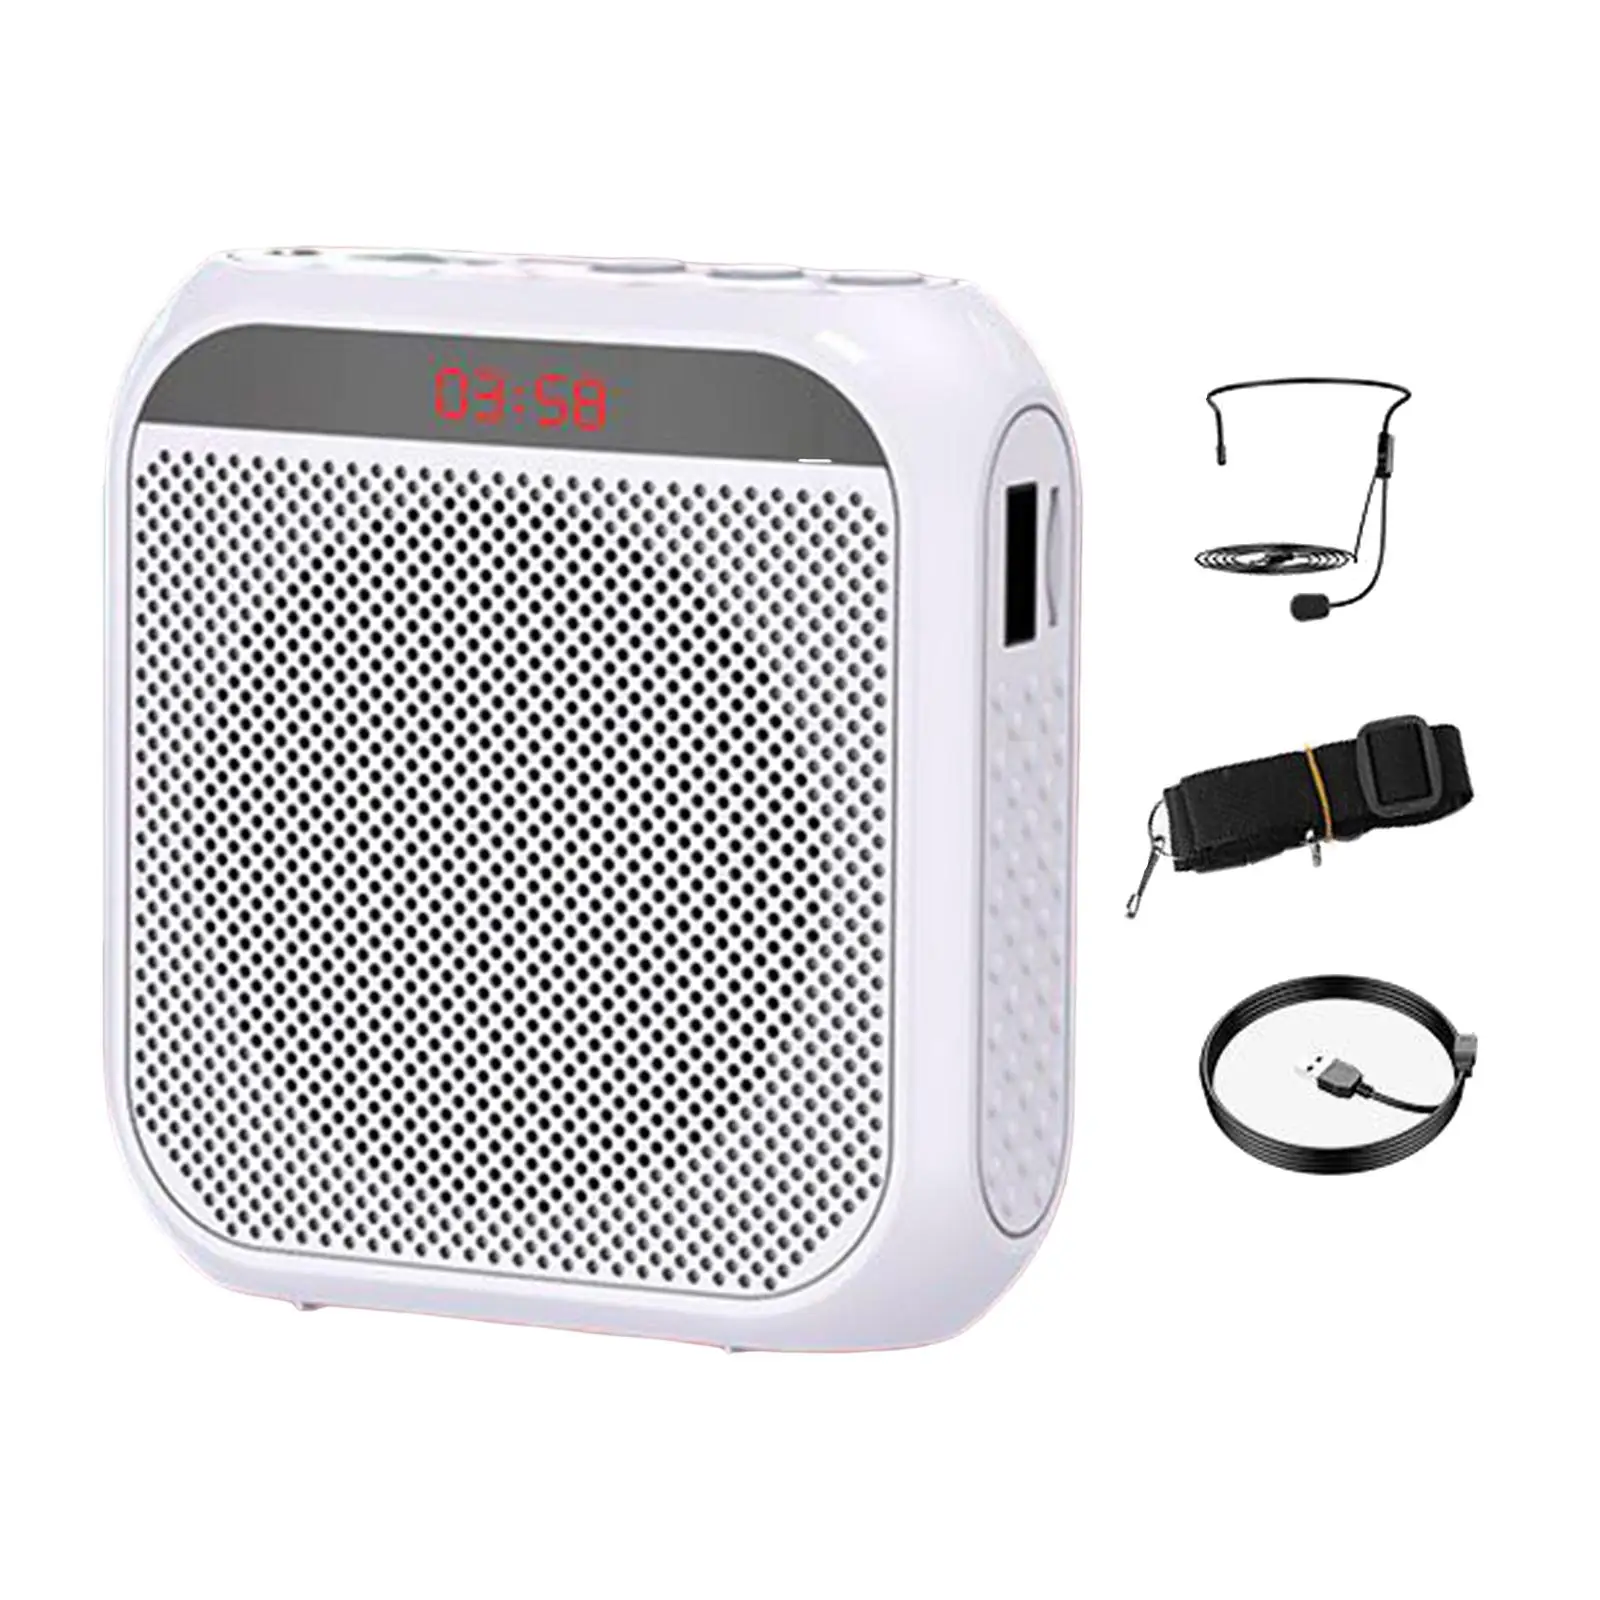 Voice Amplifier Support TF Card U Disk Vocal Boost Rechargeable Mini Speaker for Teacher Coaches Elderly Training Tour Guides